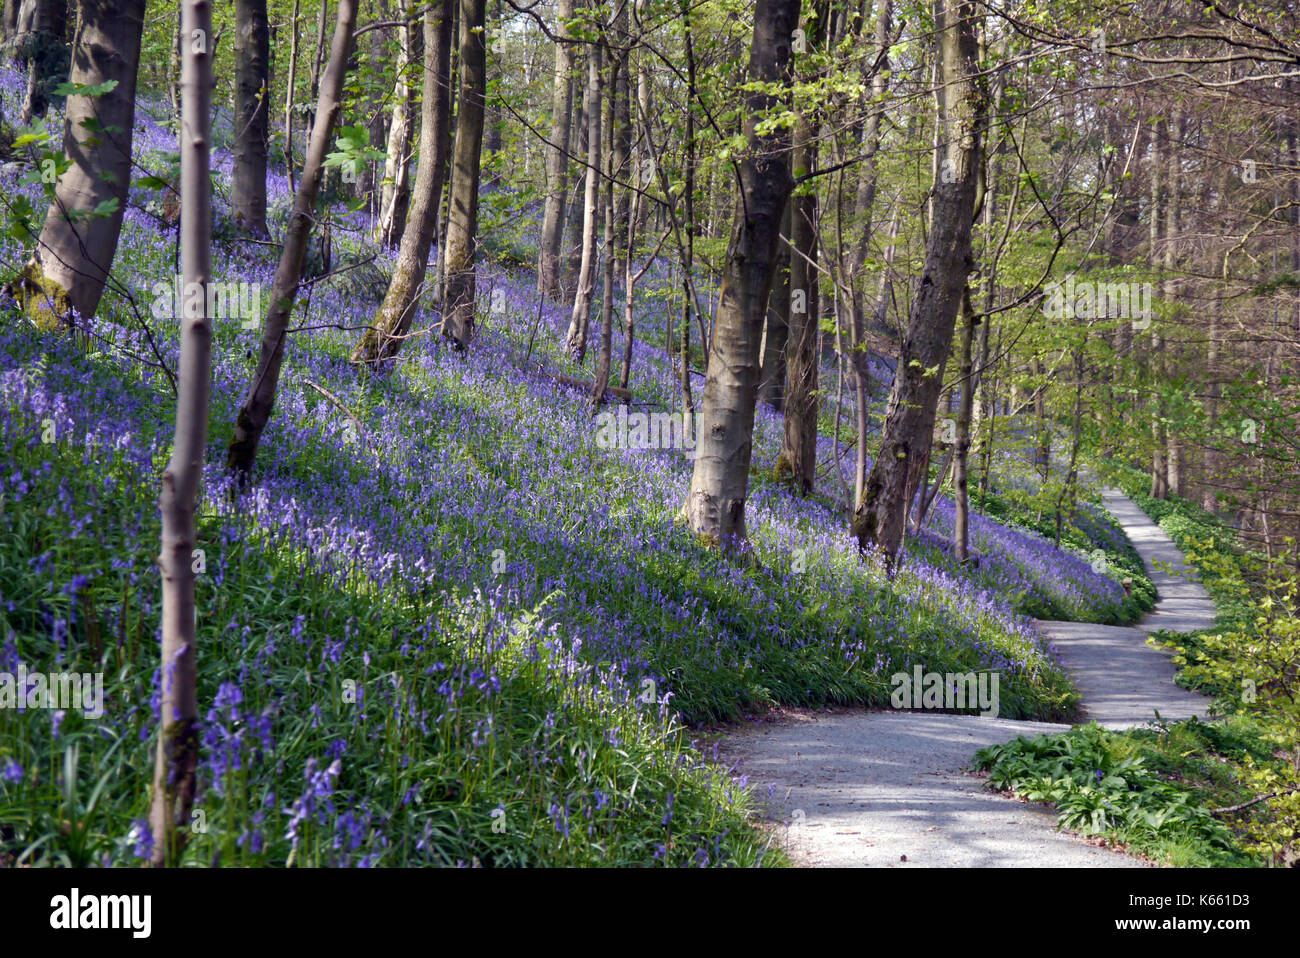 Footpath Leading Through Bluebells & Wild Garlic in Strid Wood, Bolton Abbey part of the Dales Way Long Distance Footpath, Wharfedale, Yorkshire. Stock Photo